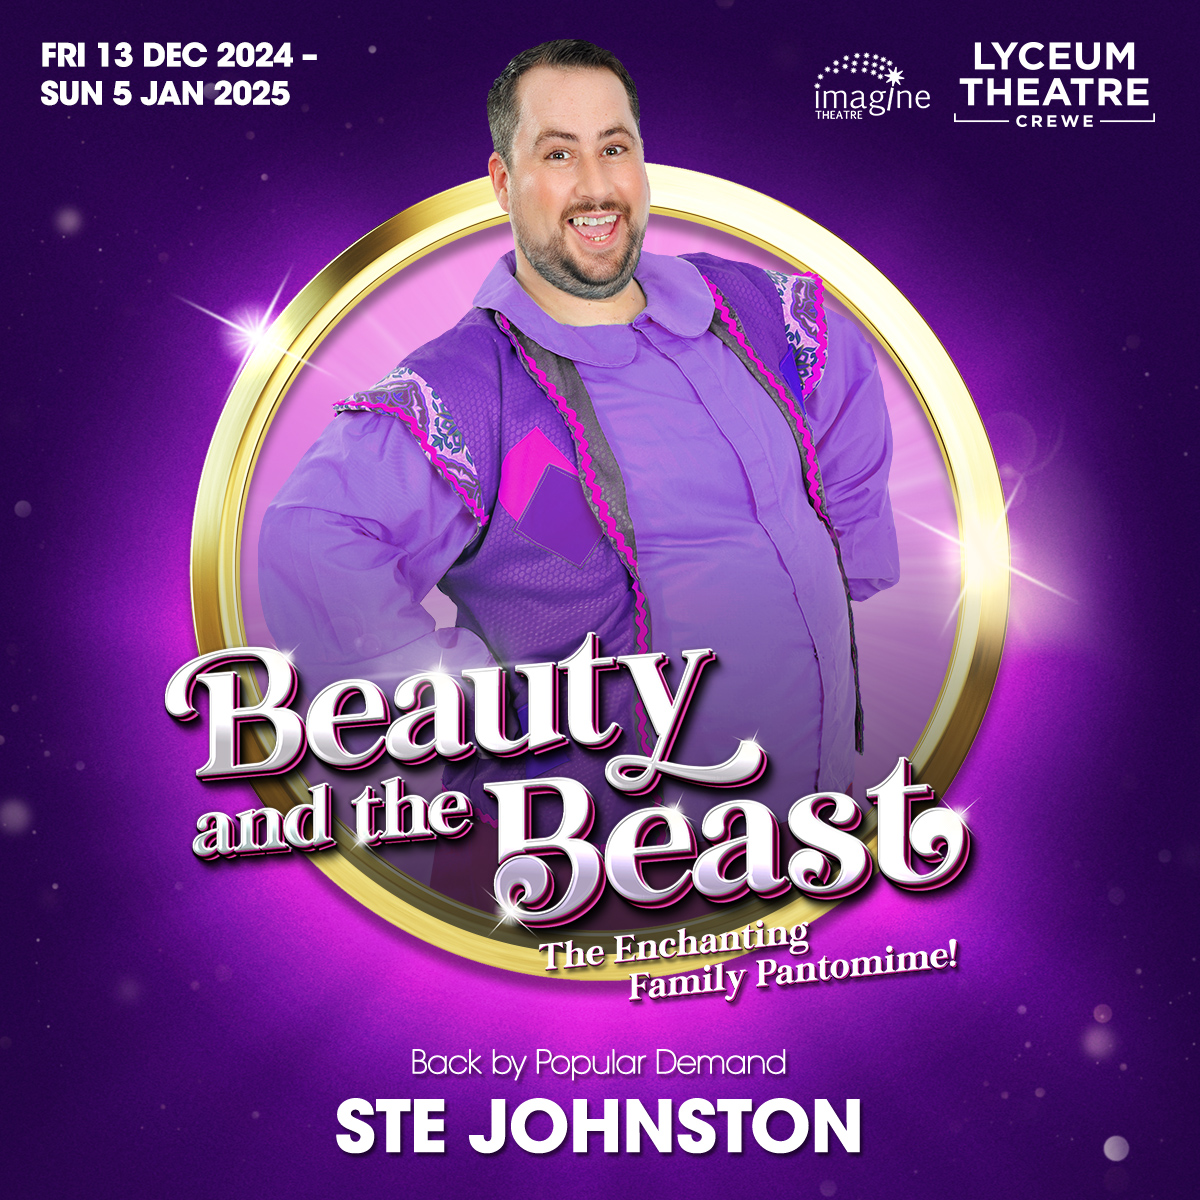 🚨 CASTING ANNOUNCEMENT 🚨 Congratulations to everyone who guessed correctly yesterday! We're thrilled to welcome back, by very popular demand, Malcolm Lord as our treasured dame, and the ever hilarious Ste Johnston for this year’s beauty of a panto! 🎫 eu1.hubs.ly/H08JbsK0